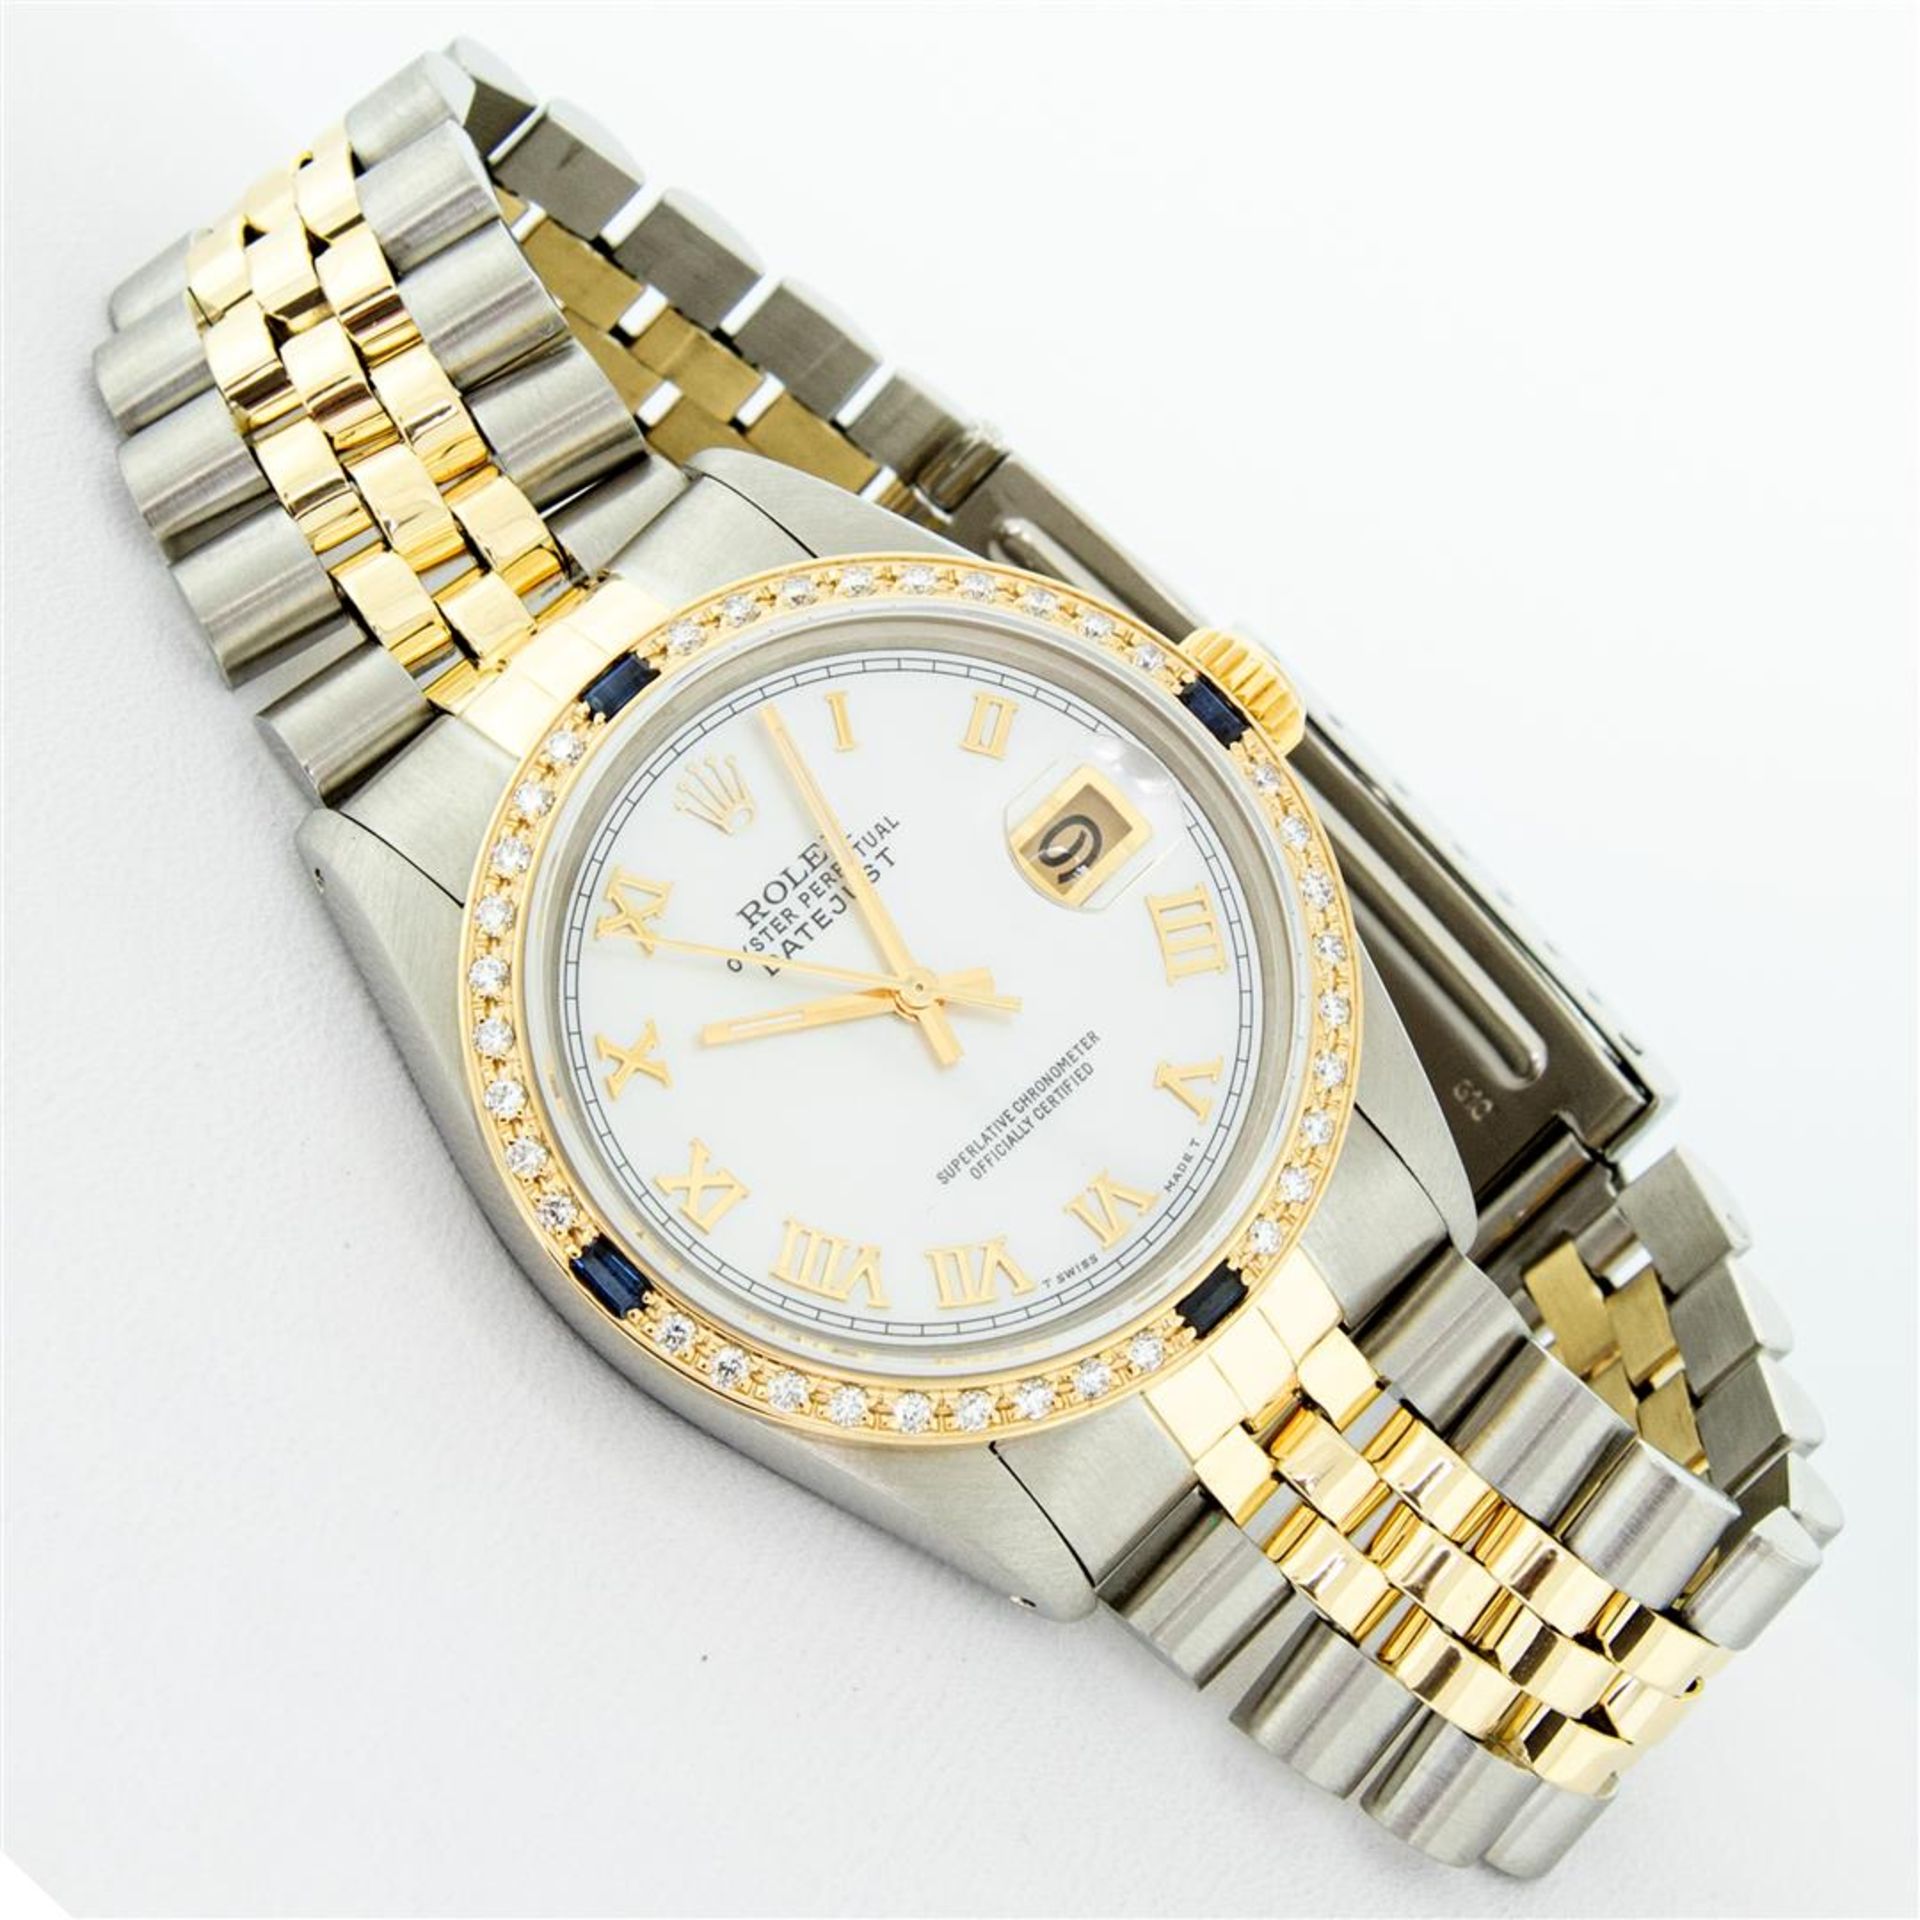 Rolex Mens 2 Tone Mother Of Pearl Diamond & Sapphire 36MM Datejust Wristwatch - Image 3 of 9